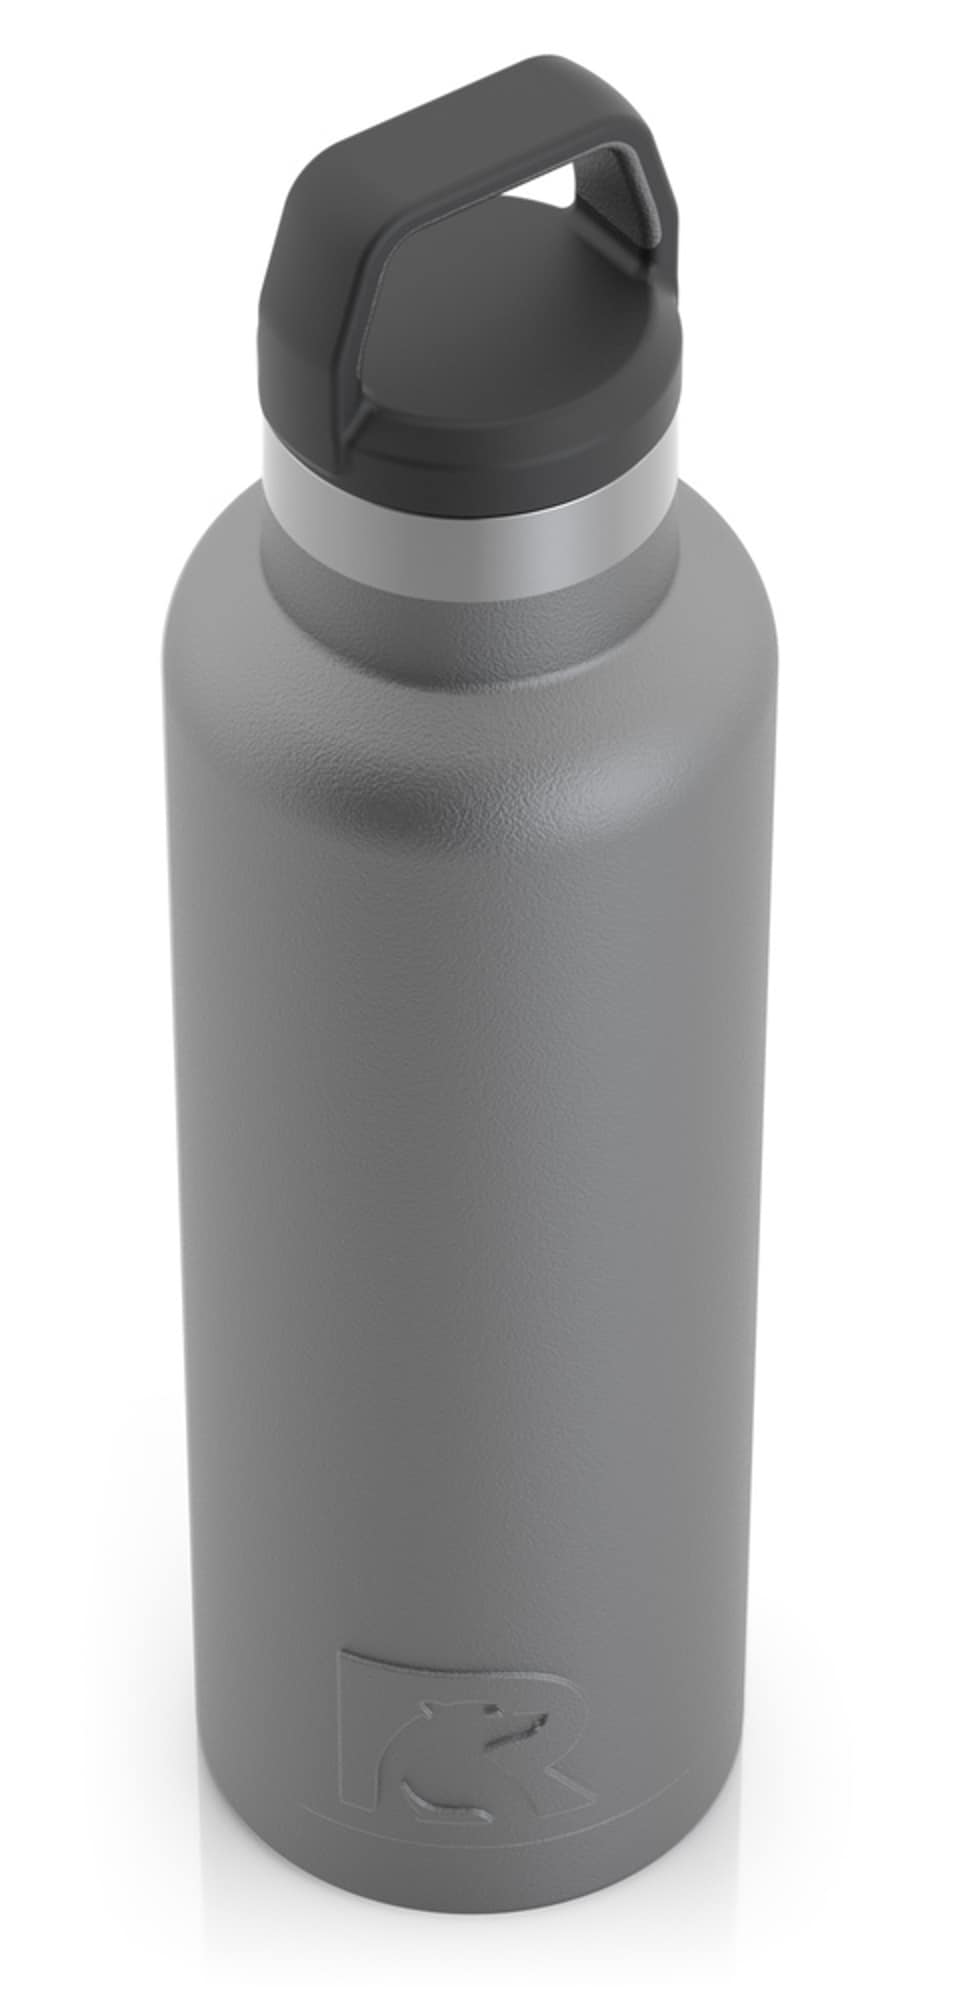 Liberty 20 oz. Charcoal Insulated Stainless Steel Water Bottle with D-Ring Lid, Grey